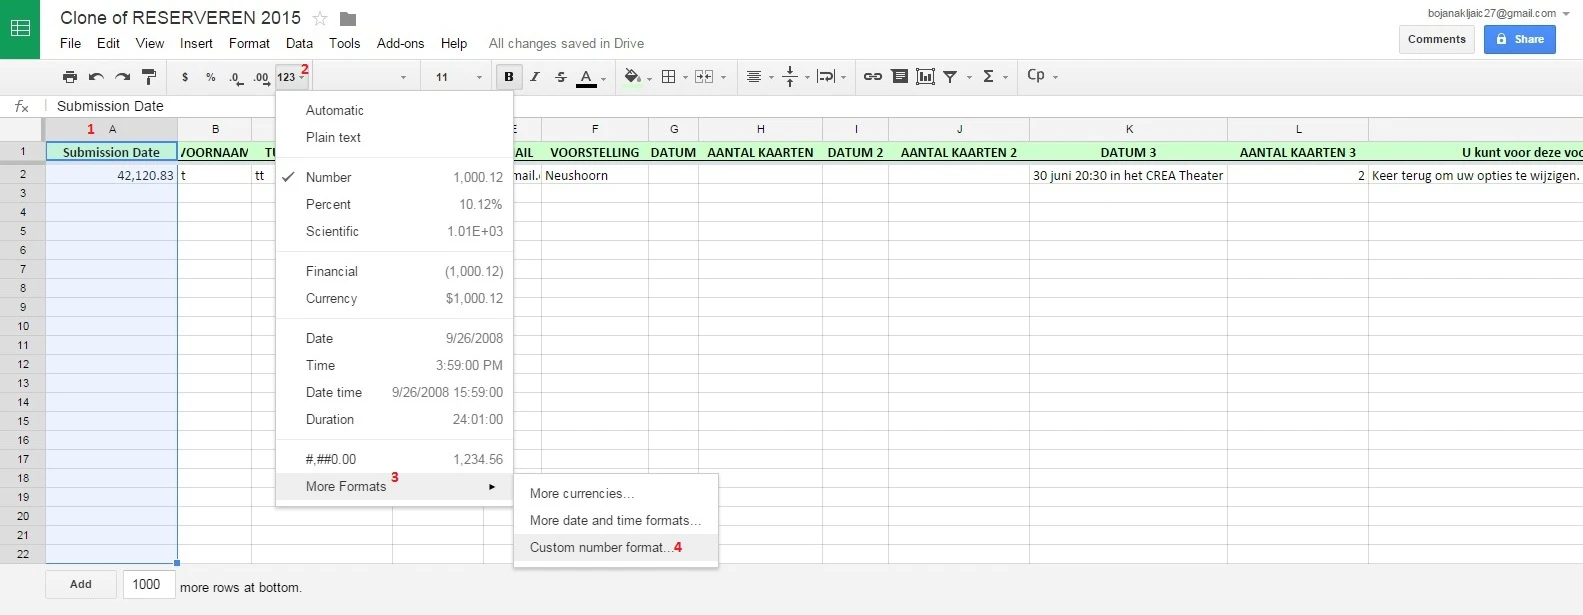 Google Spreadsheet shows faulty dates for made submissions Image 1 Screenshot 30